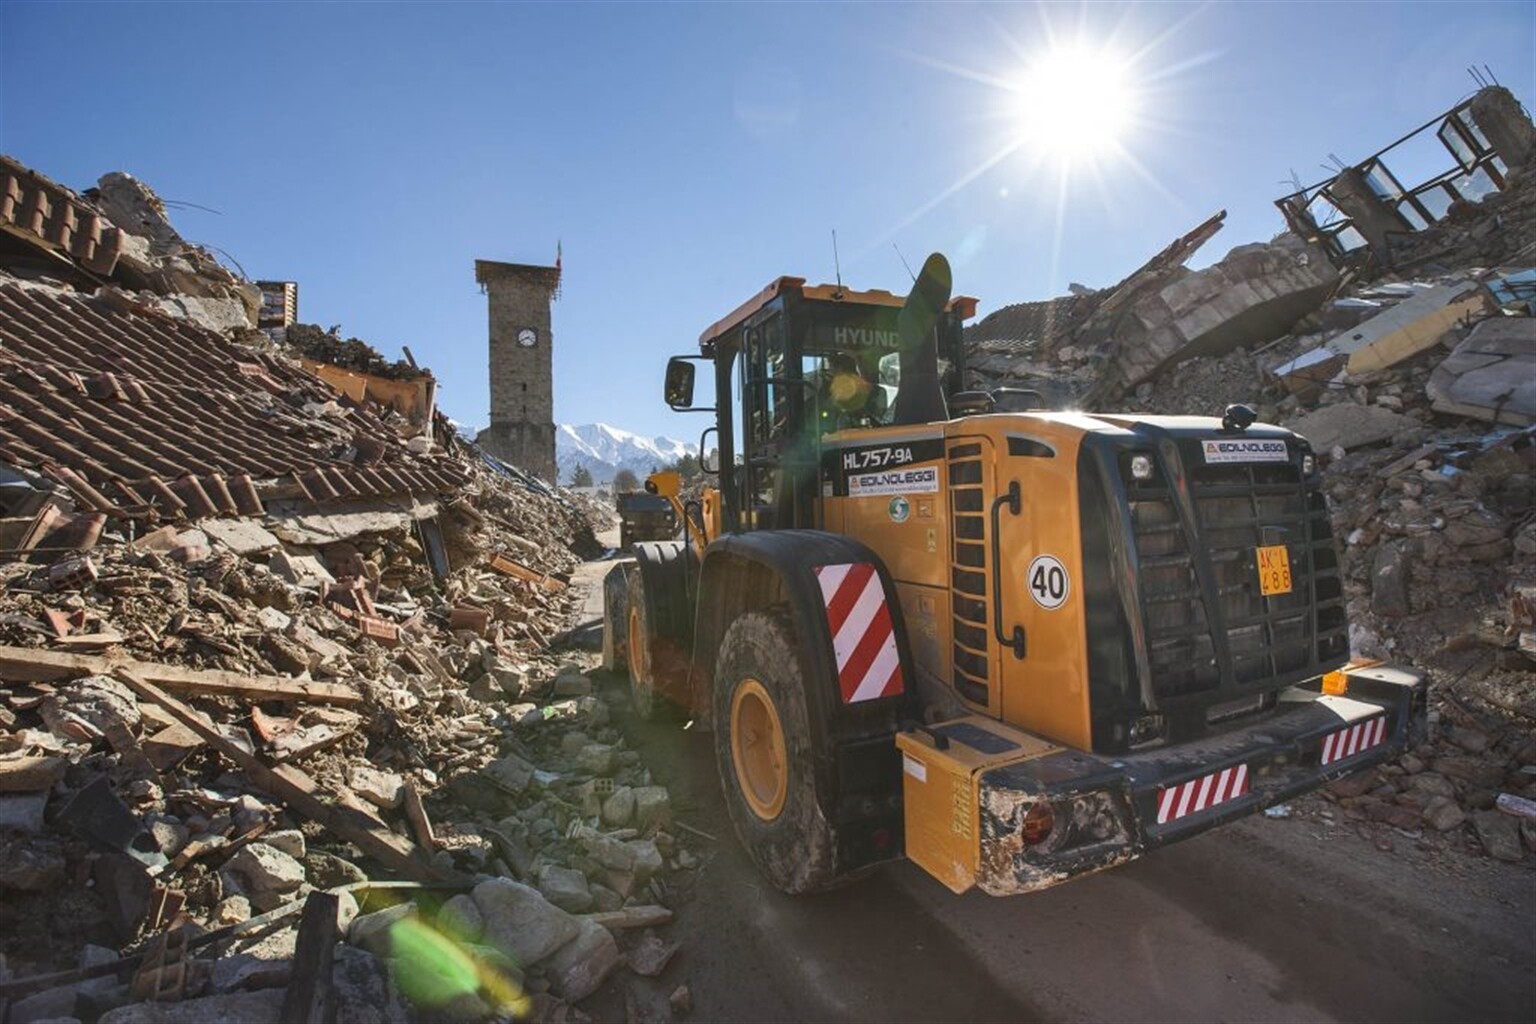 Hyundai kit helps with the clean up after Italian earthquake